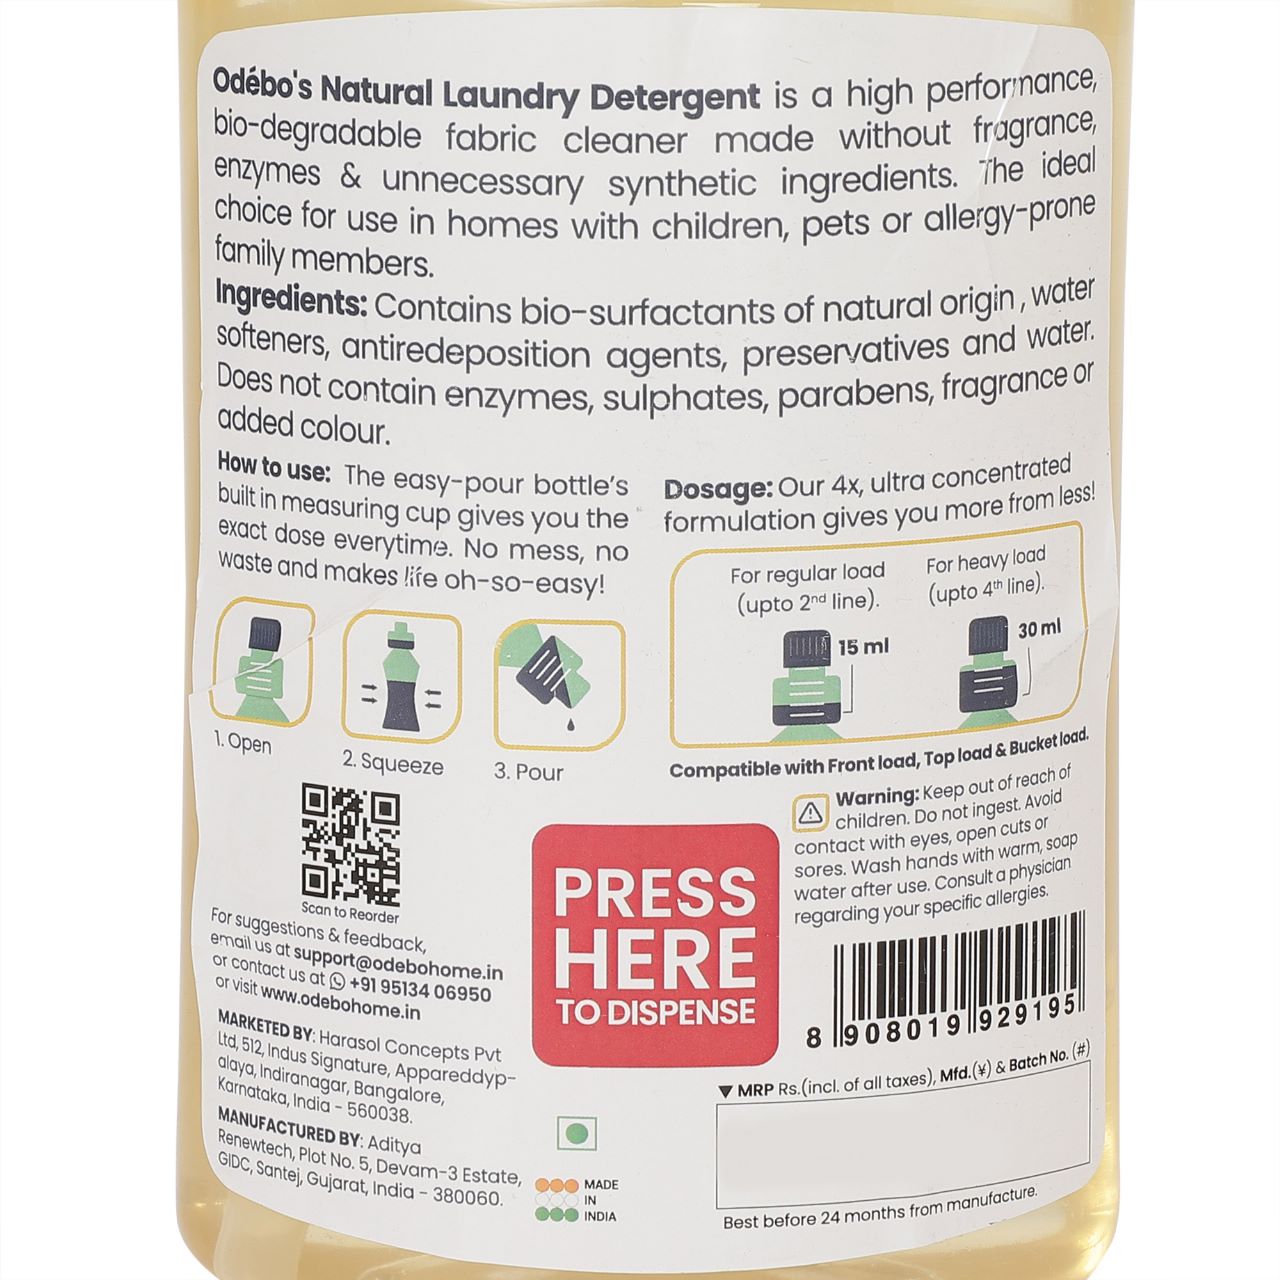 Laundry Detergent -  Details and Instructions